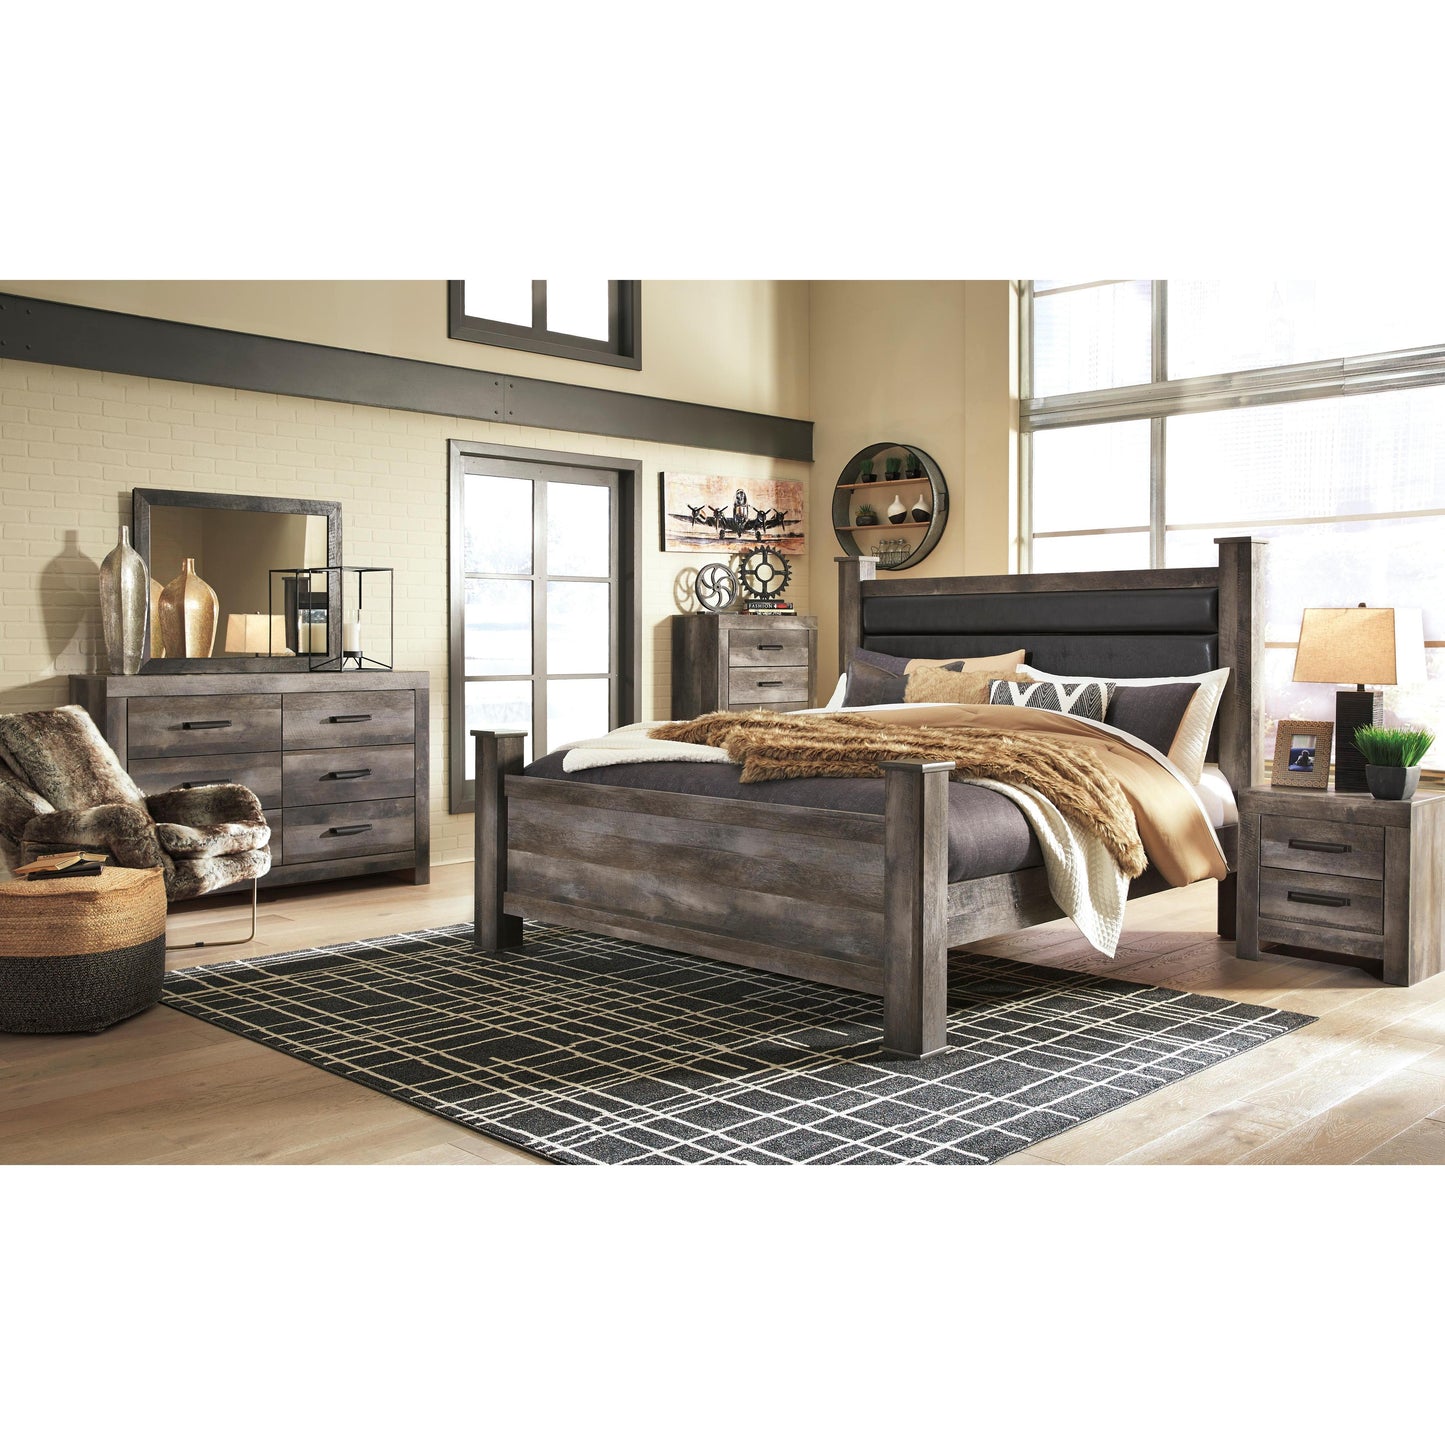 Signature Design by Ashley Wynnlow B440 5 pc King Poster Bedroom Set IMAGE 1